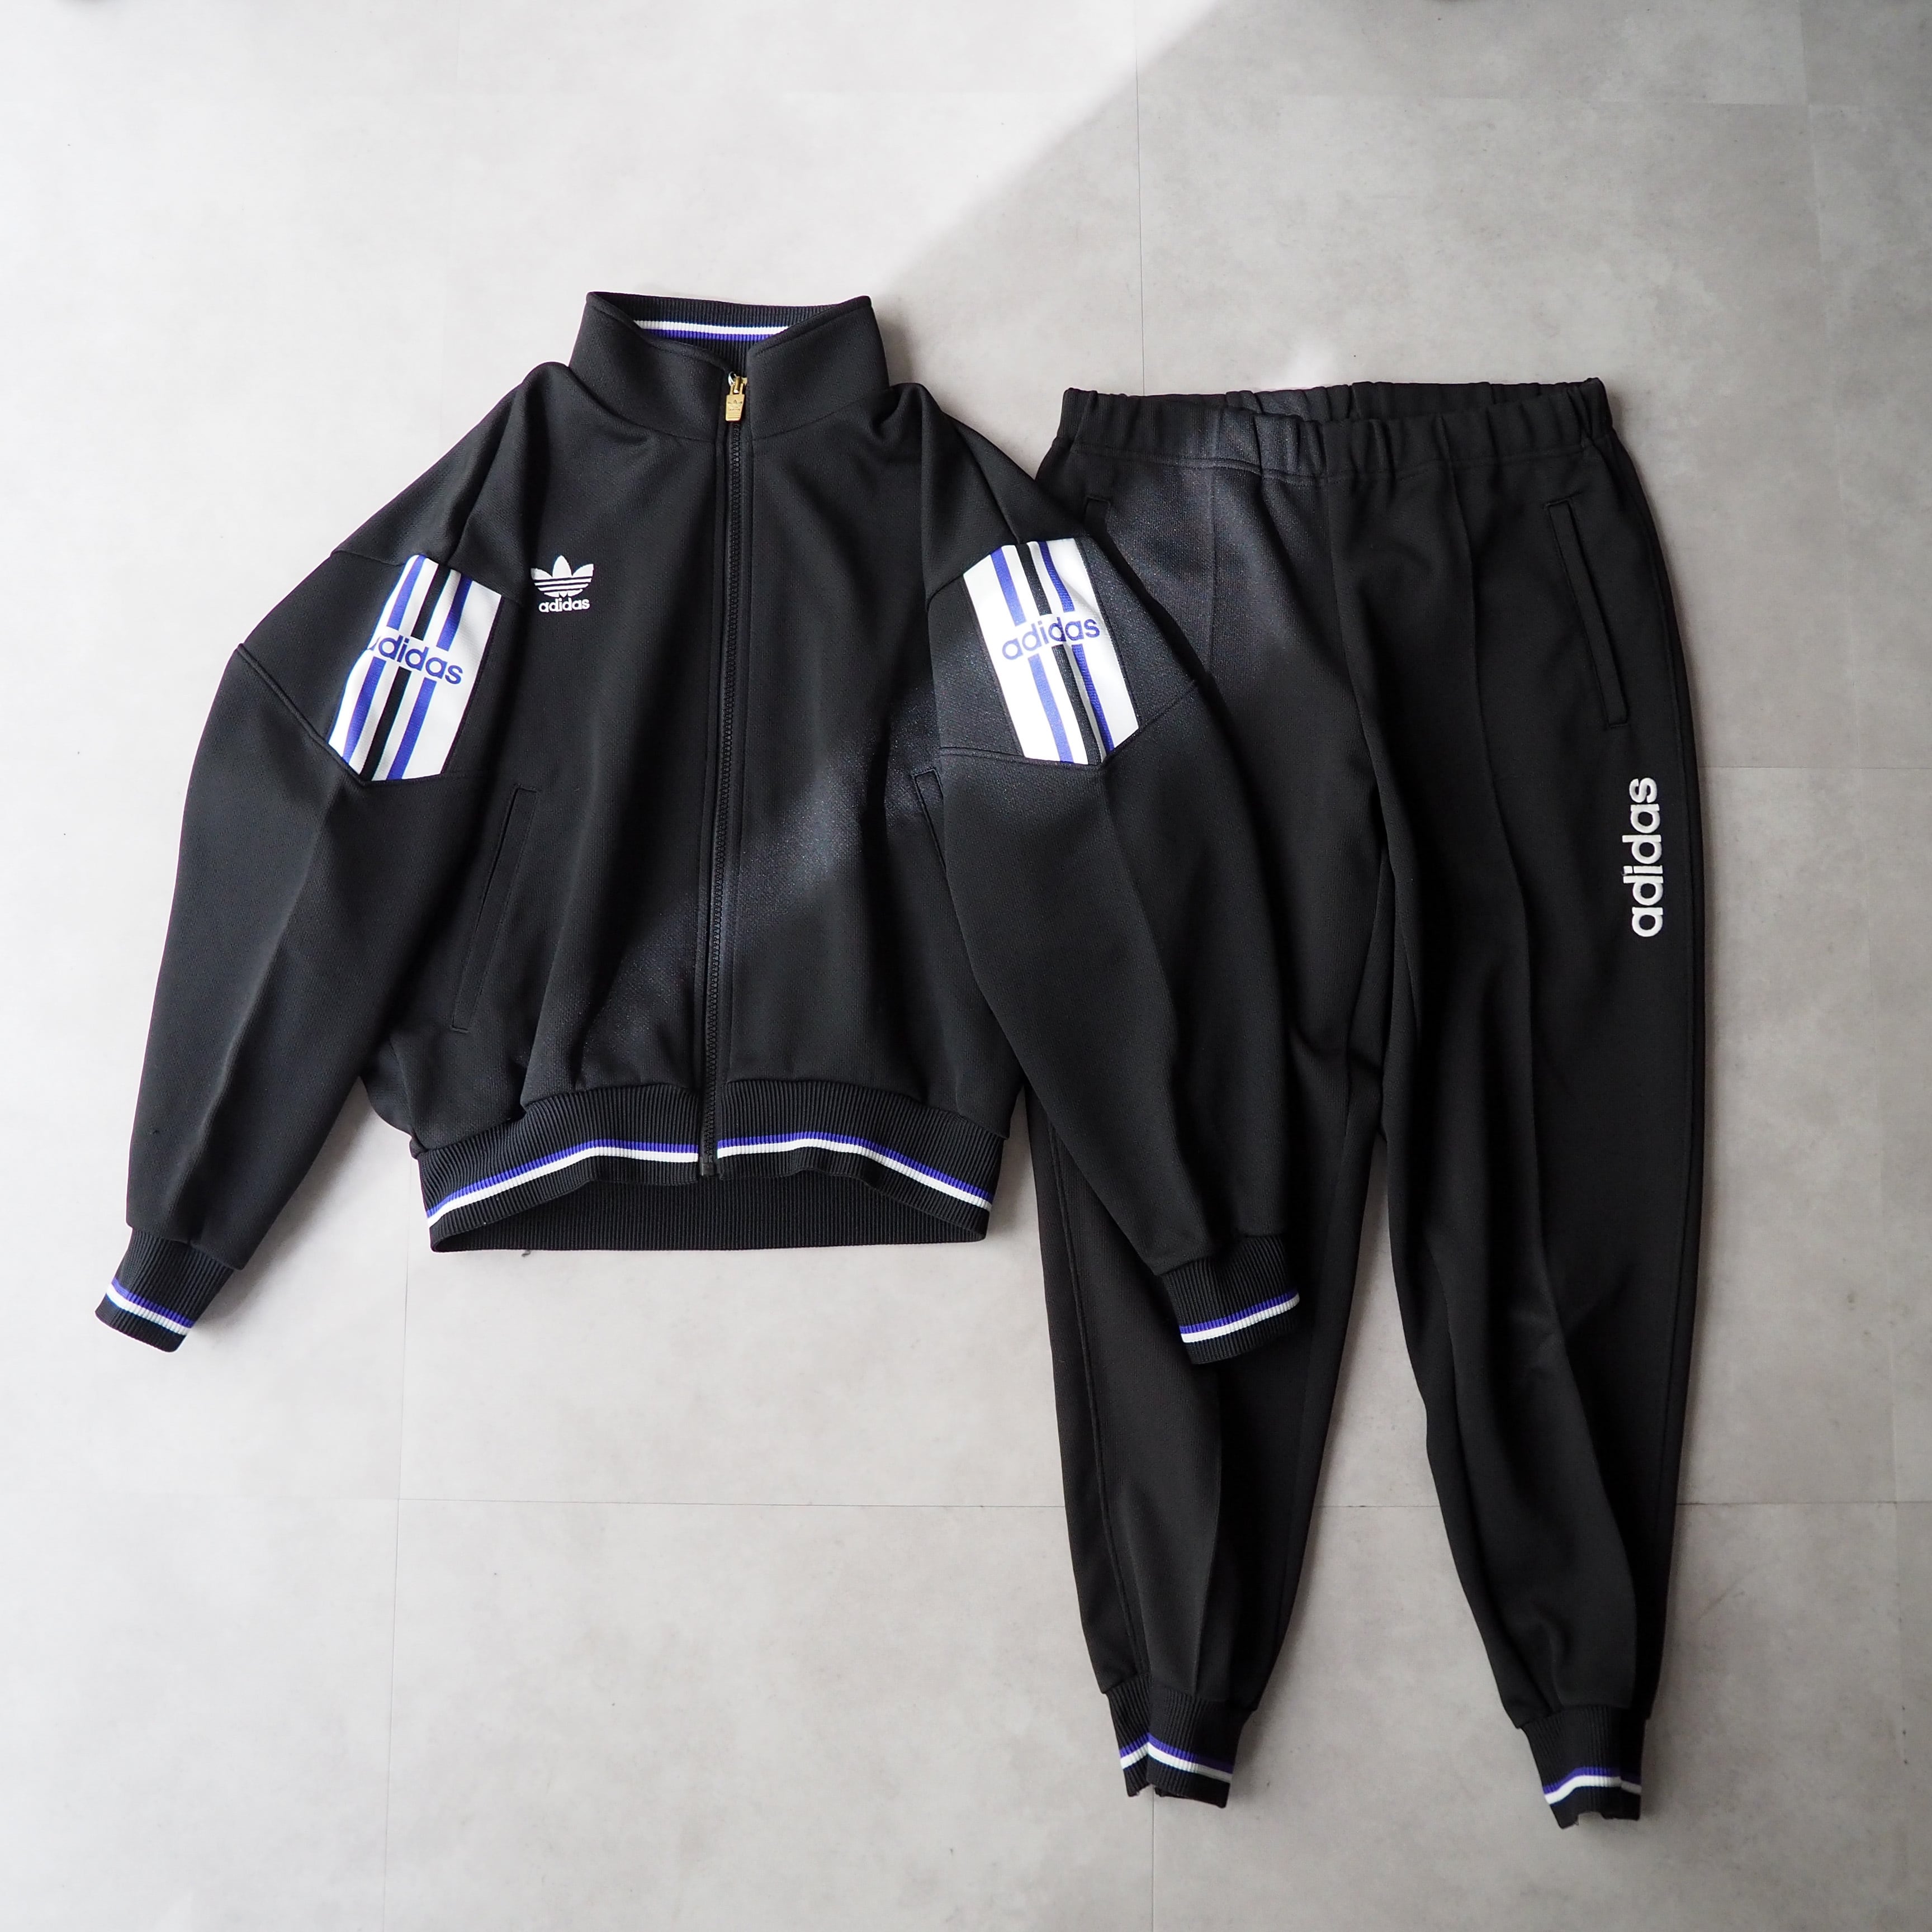 80s-90s “ADIDAS” by DESCENTE track jacket & pants set up 80年代